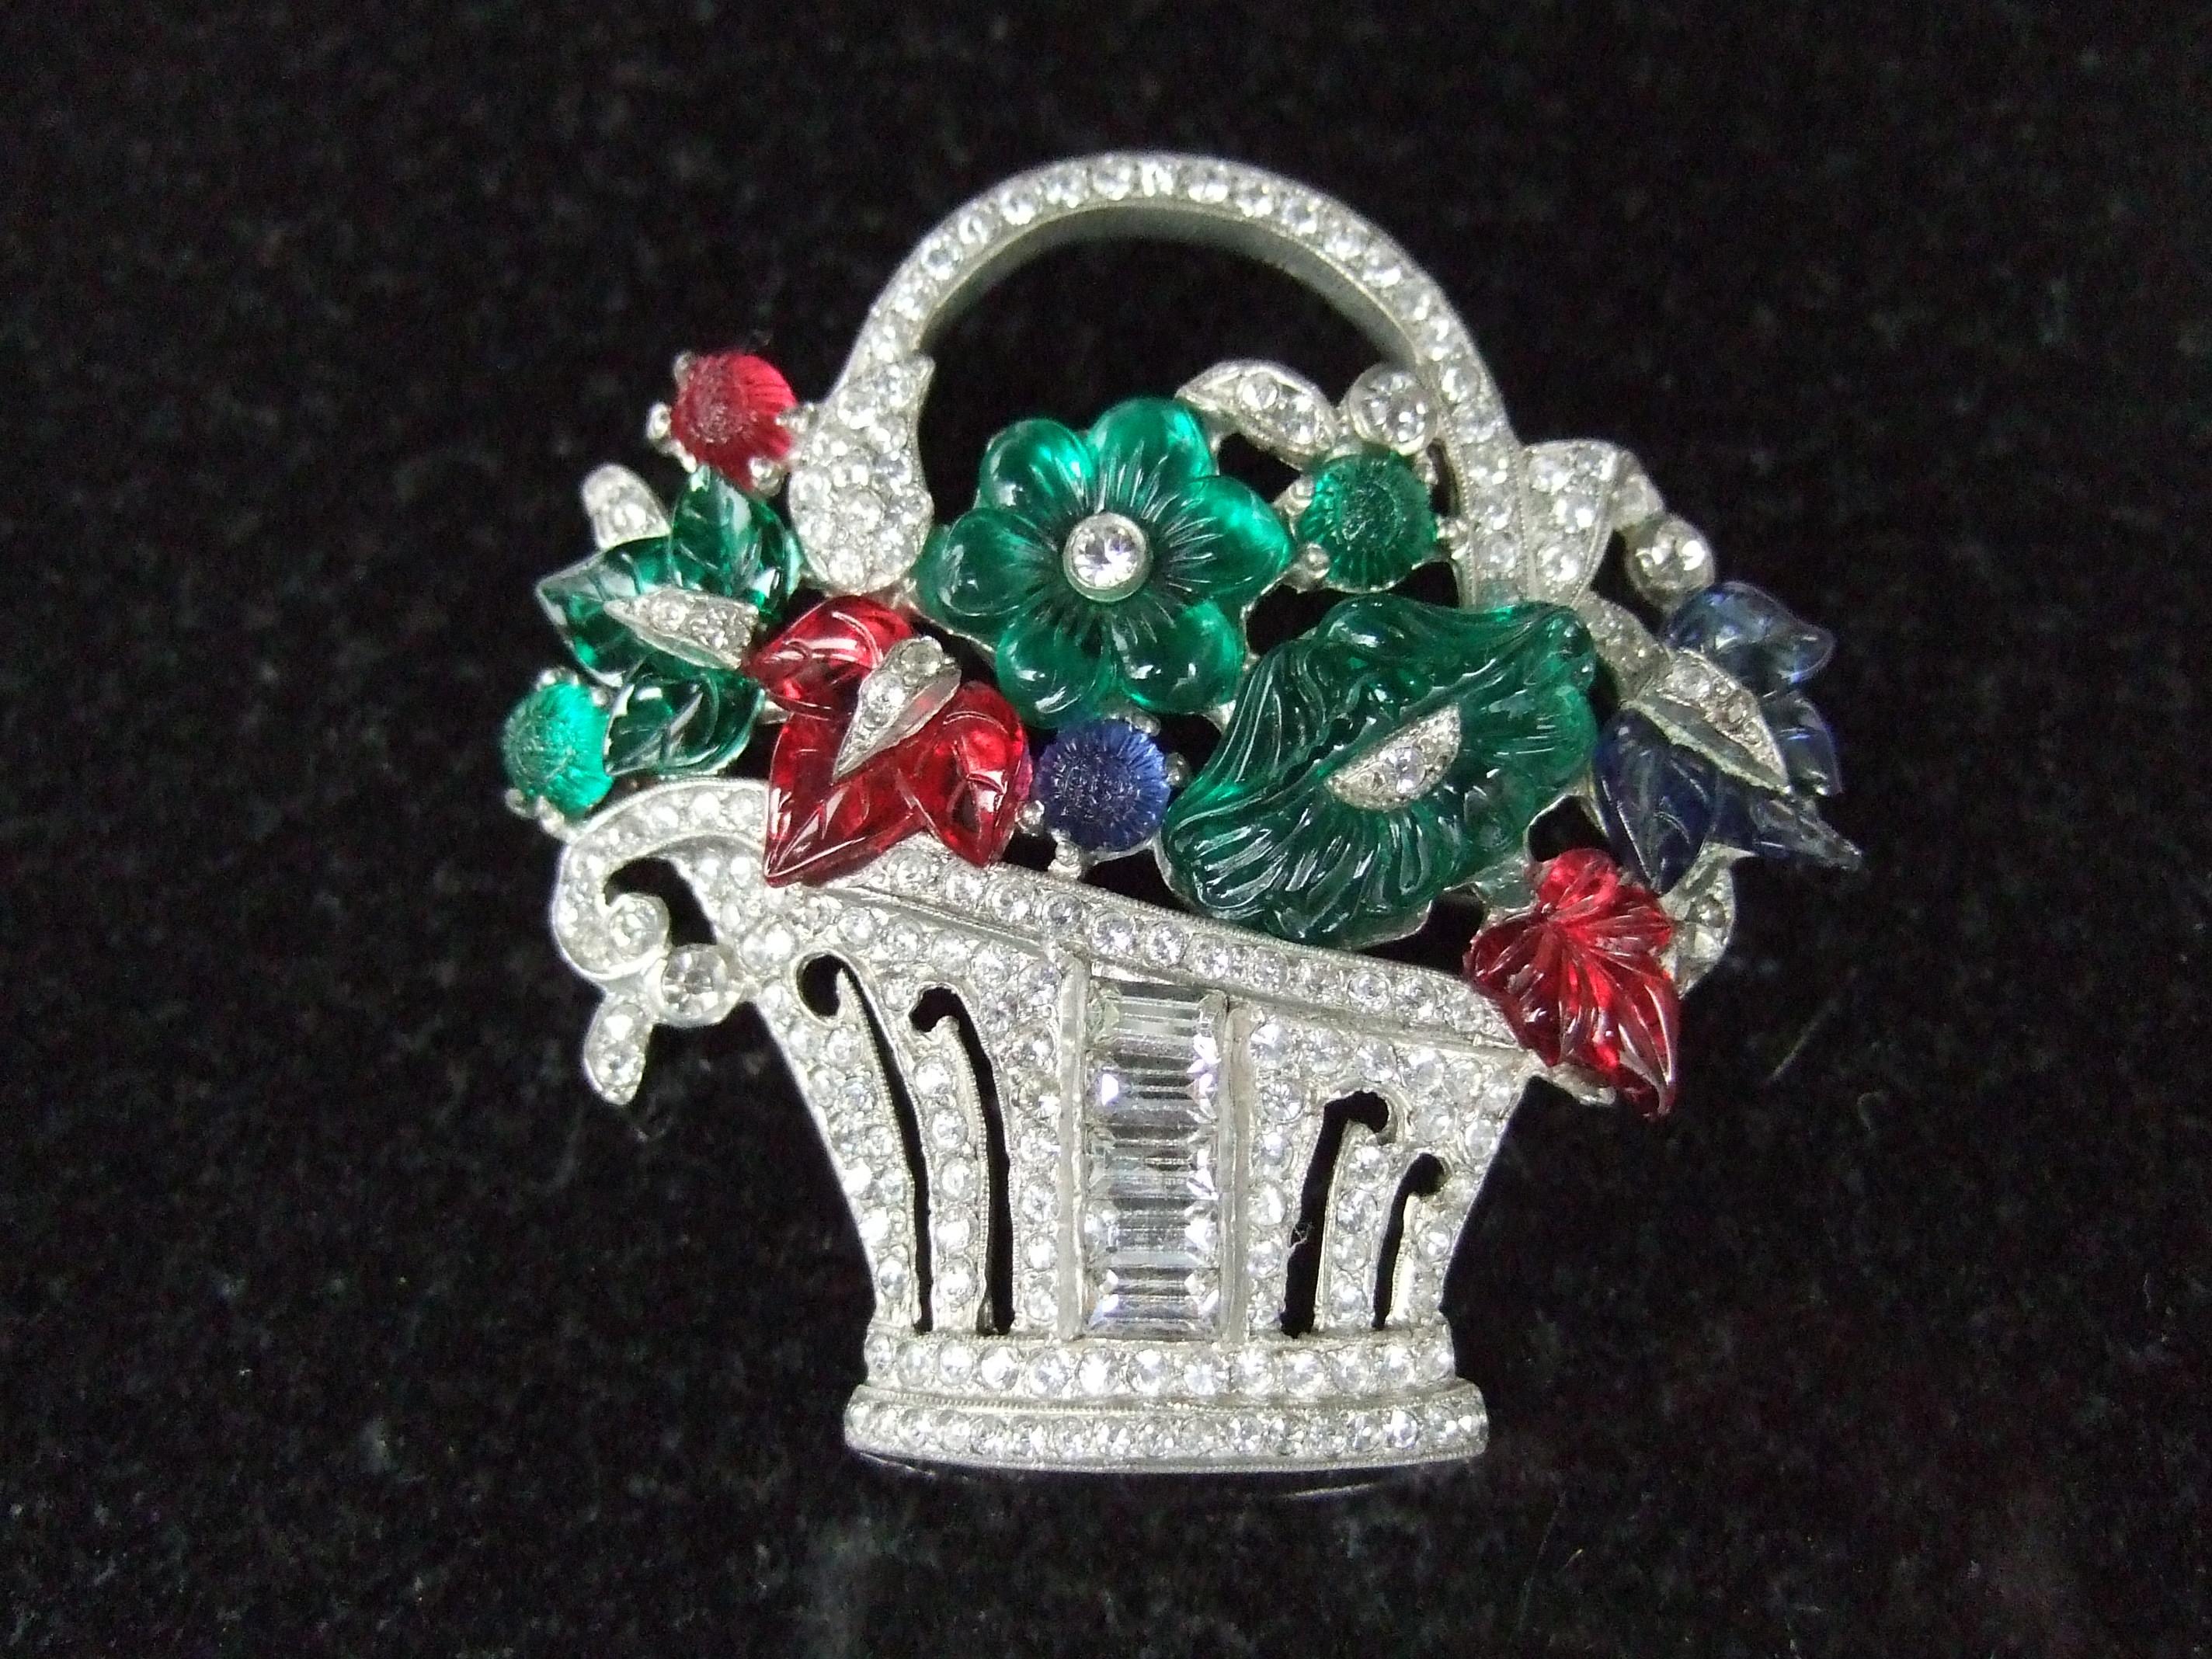 Trifari Art Deco exquisite carved glass fruit salad flower basket brooch c 1930s
Embellished with a collection of jewel tone carved glass flowers
in emerald green, sapphire blue & ruby red colored glass 

Encrusted with rows of glittering clear